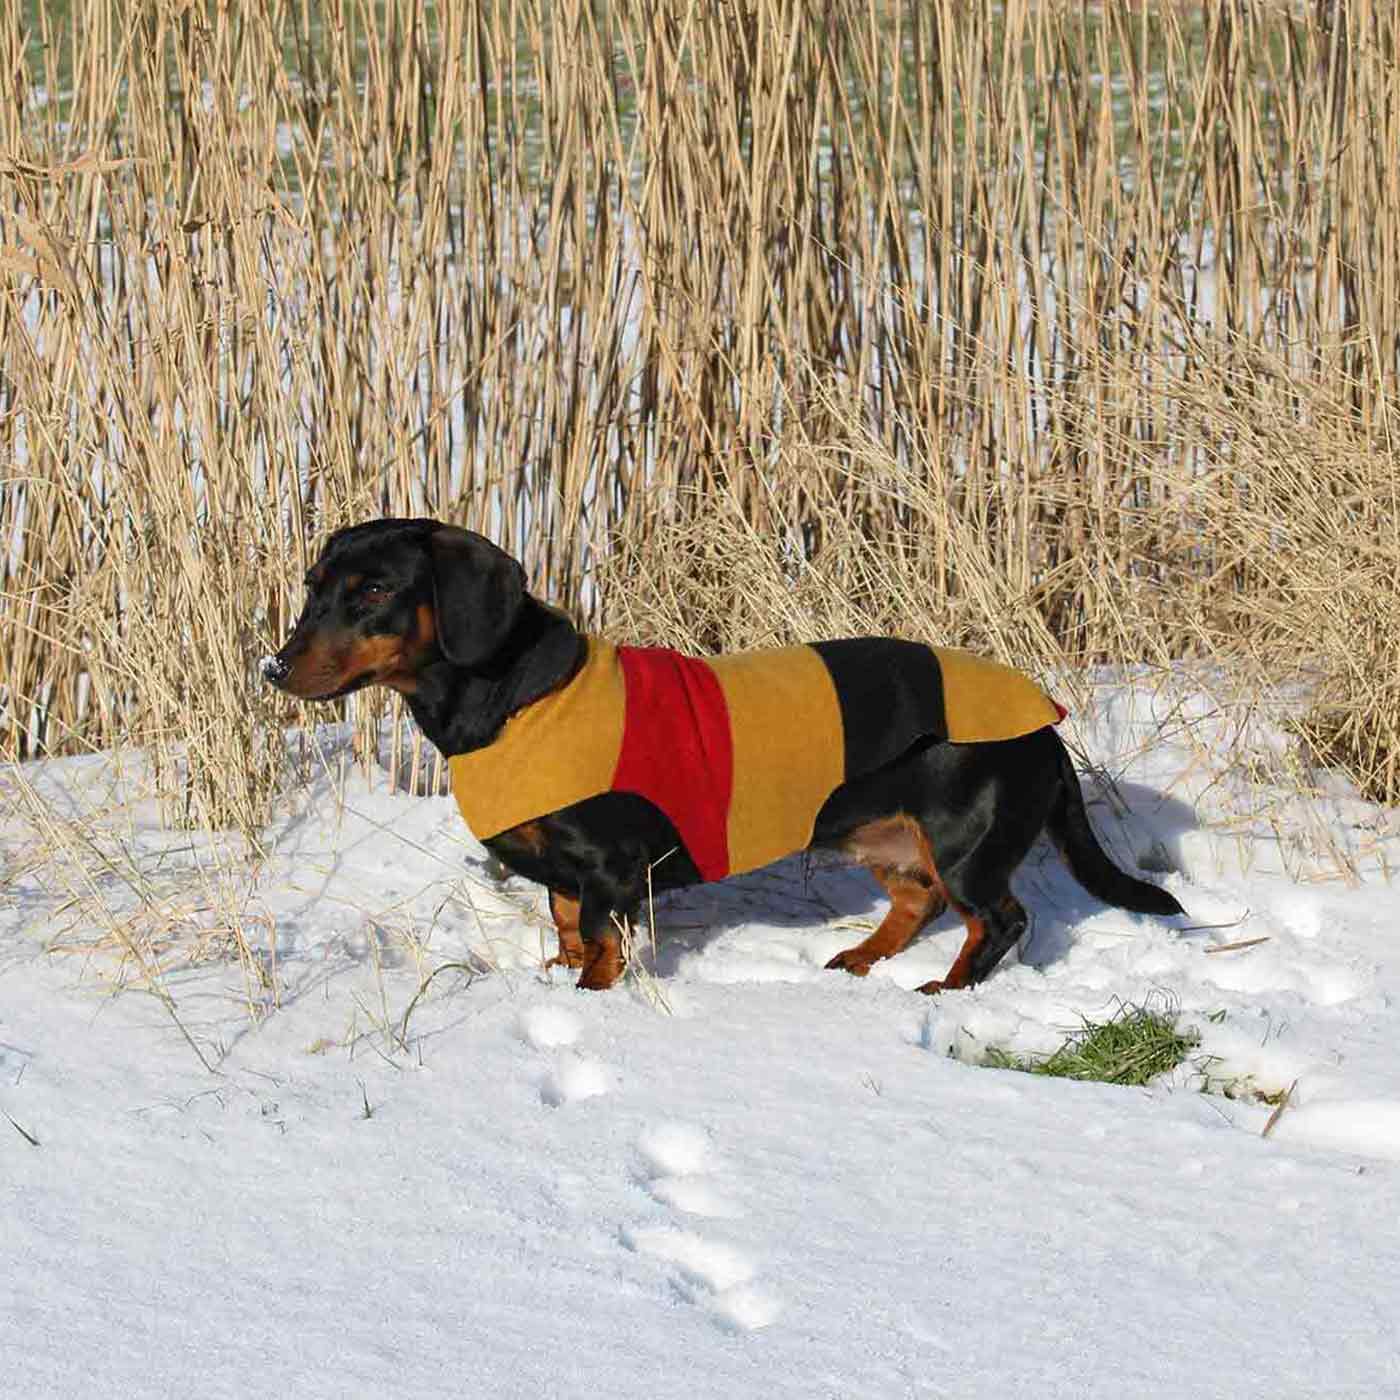 what color is my dachshund